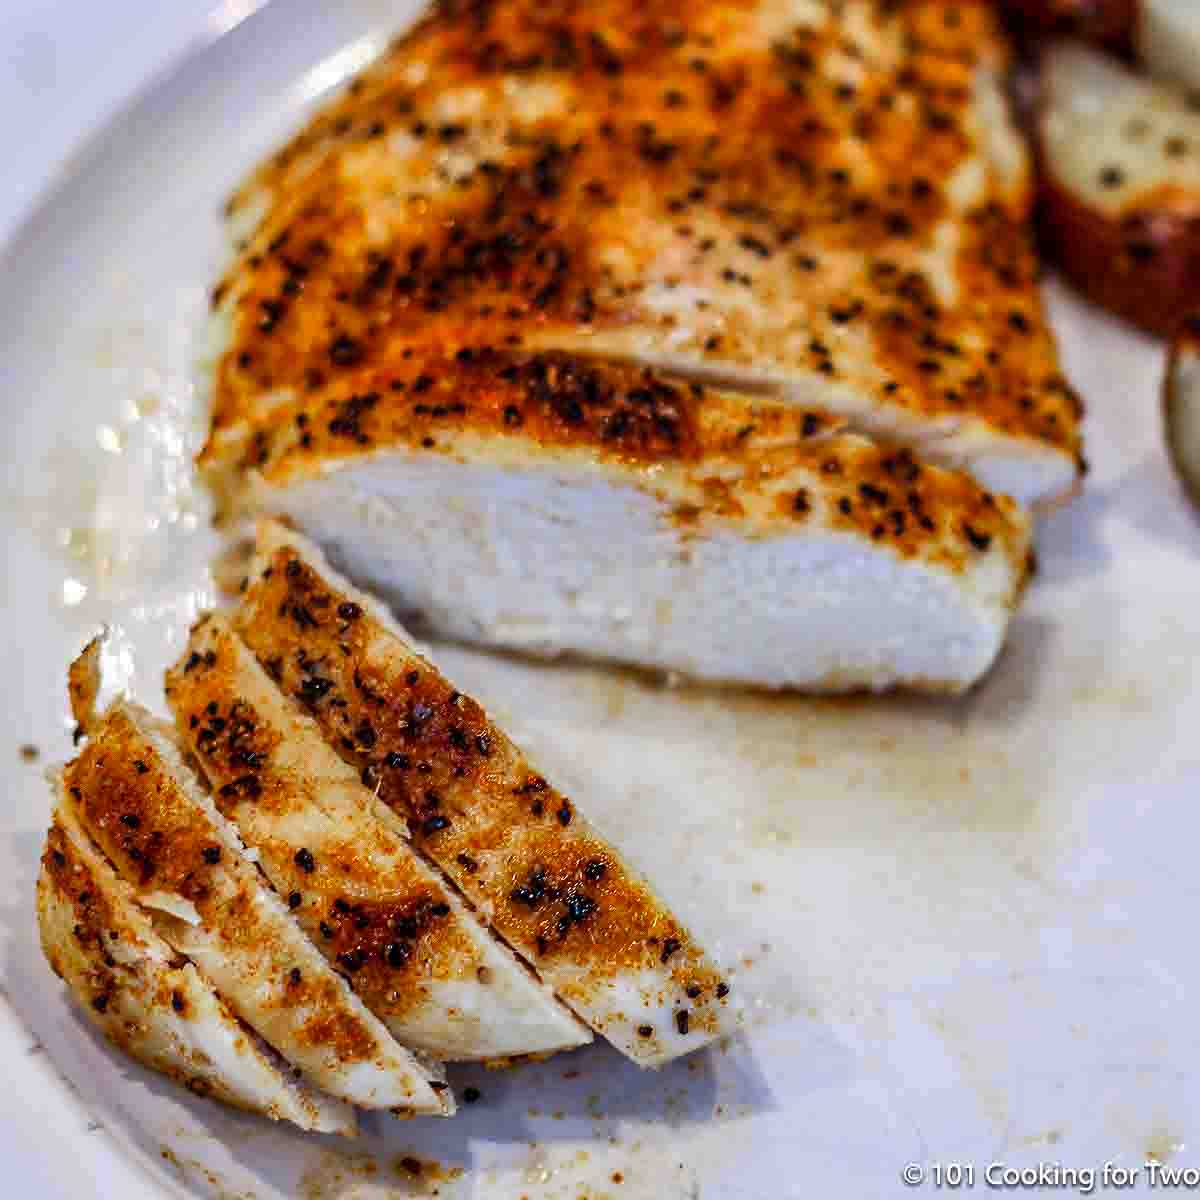 image of cut baked chicken on white plate